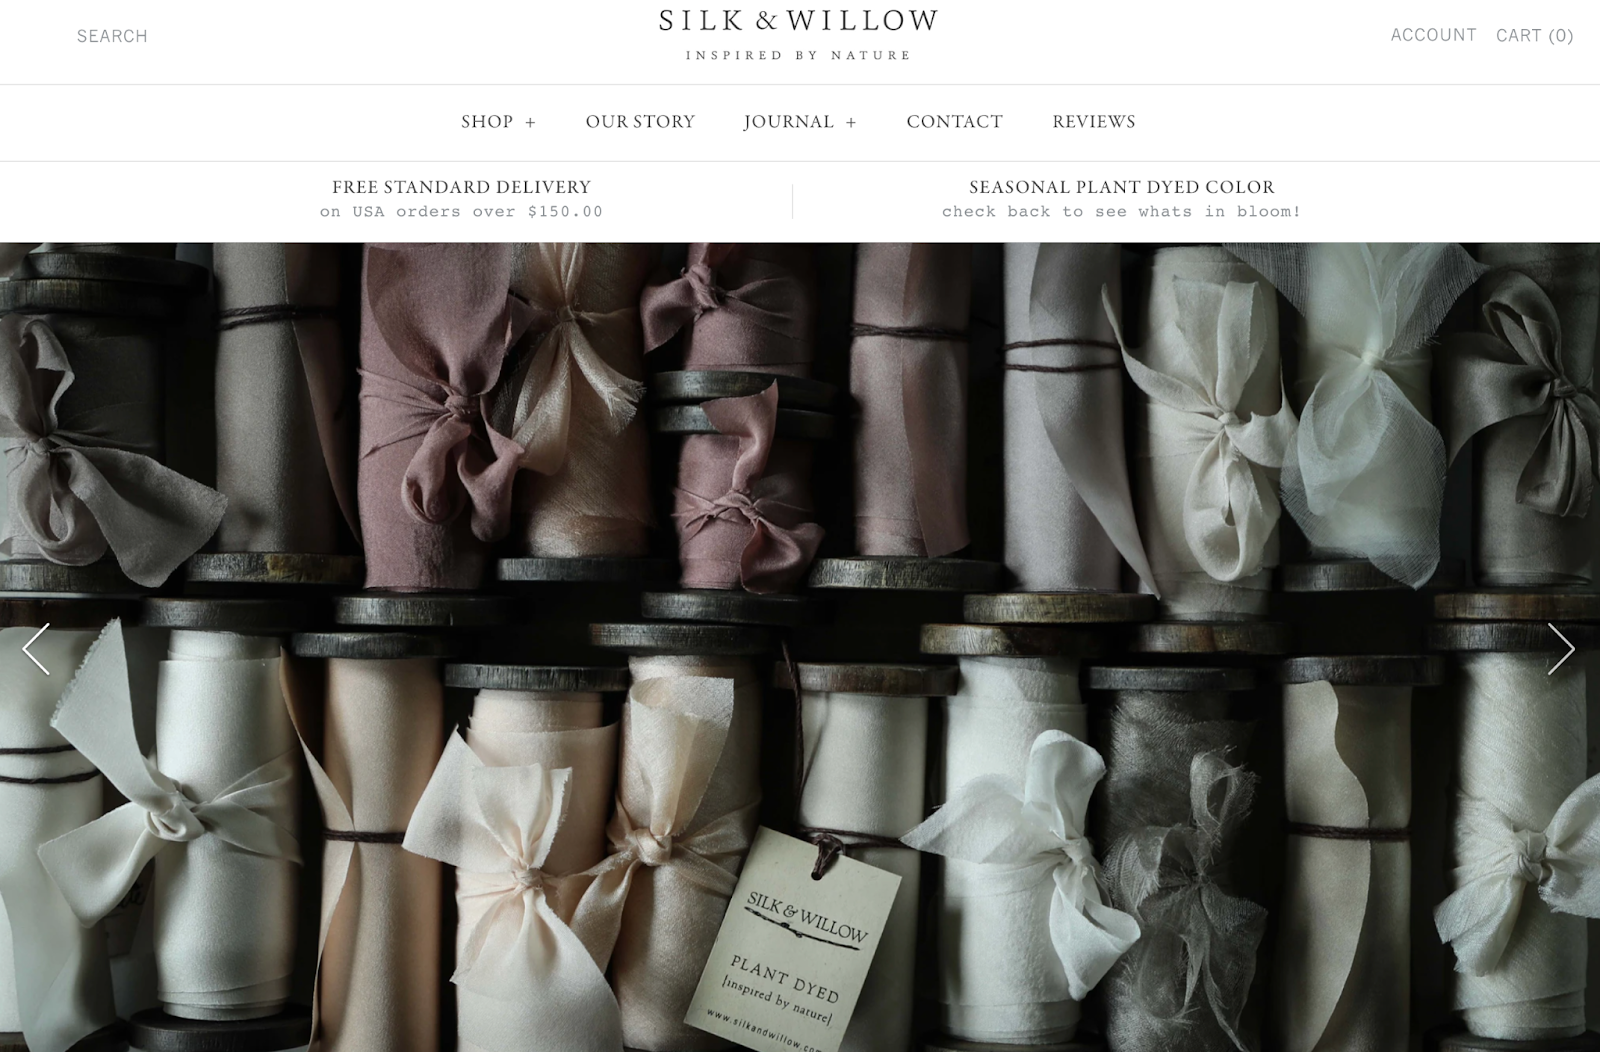 Sillow + Willow boutique